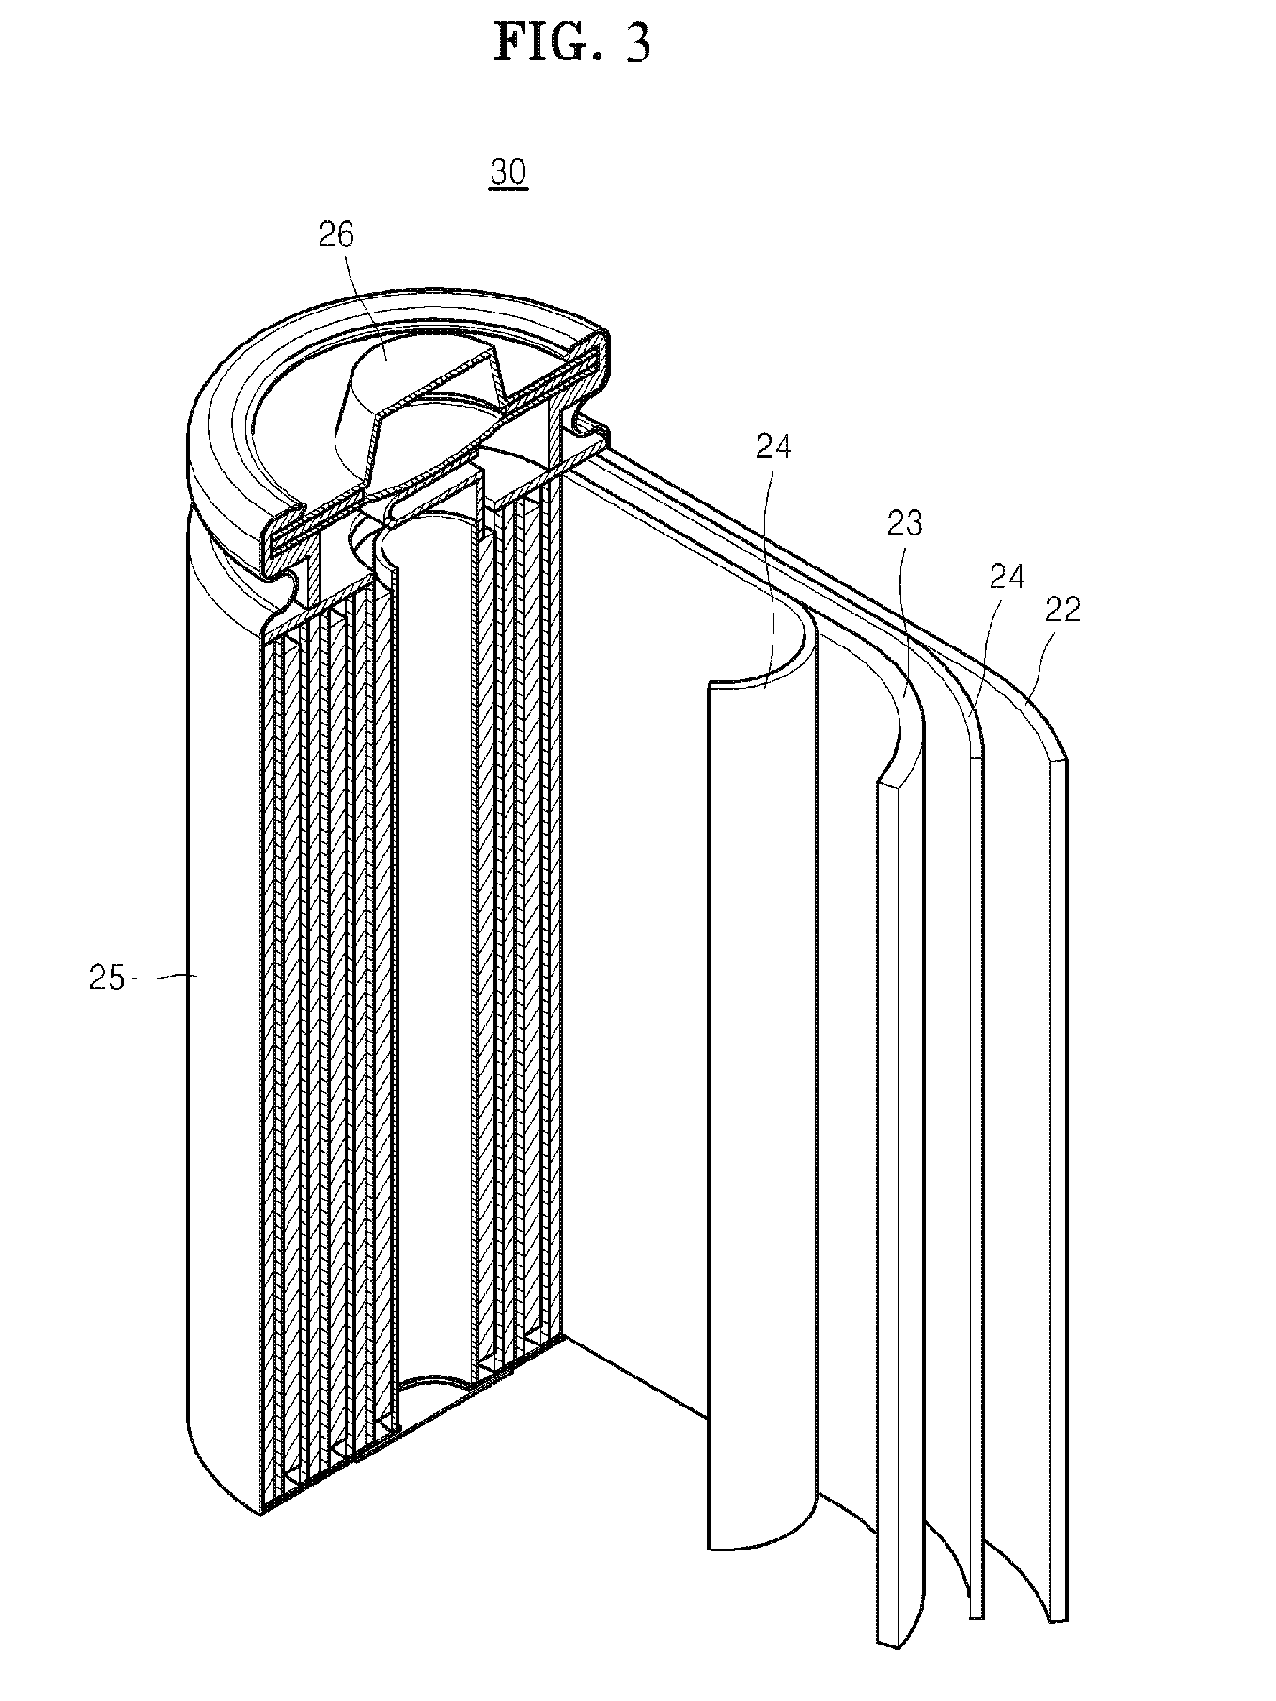 Composite anode active material, anode including the composite anode active material, lithium battery including the anode, and method of preparing the composite anode active material